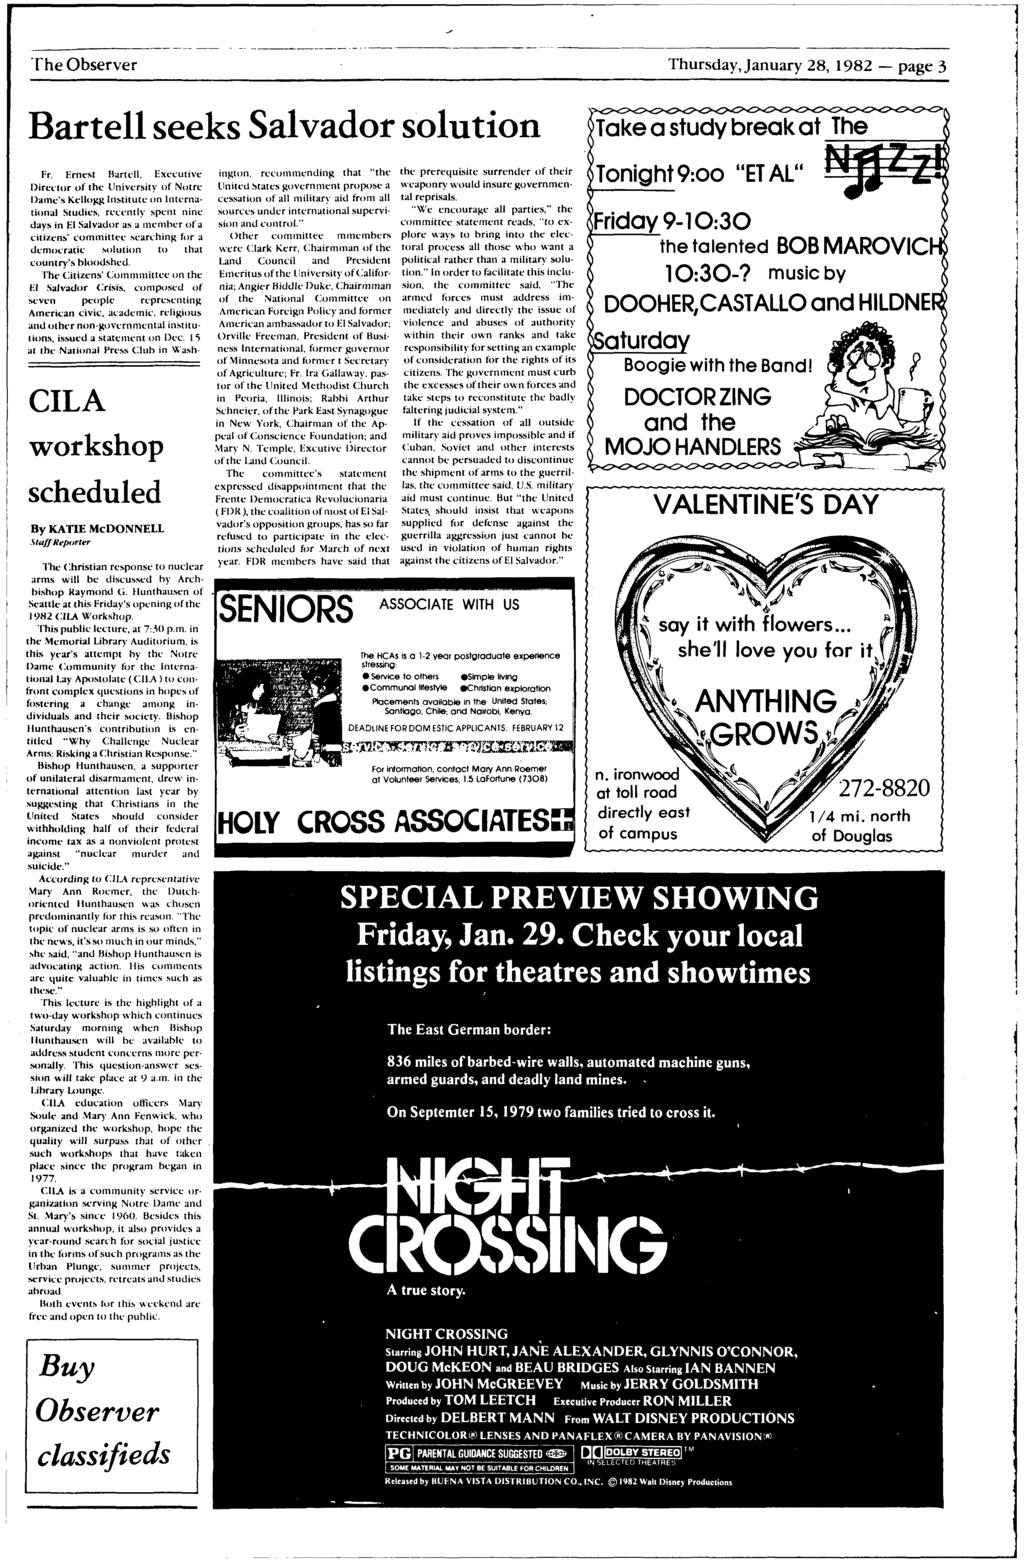 The Observer -- ---------------- ----------------------- Thursday,January 28, 1982- page 3 -----1 1 Bartell seeks Salvador solution Fr.